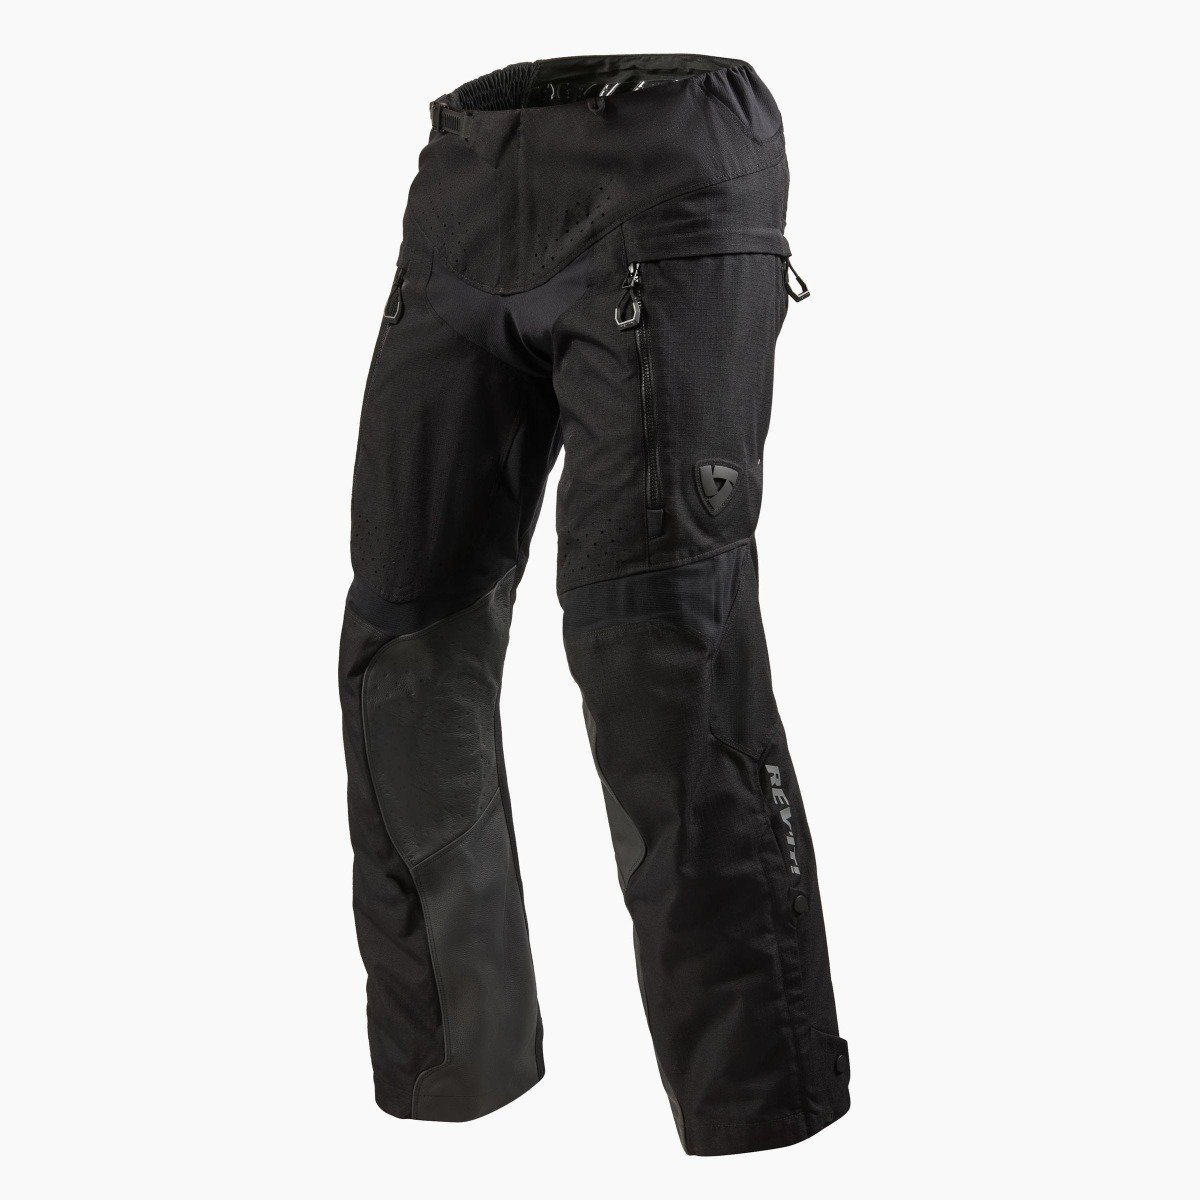 Image of REV'IT! Continent Short Black Motorcycle Pants Size XL ID 8700001297103